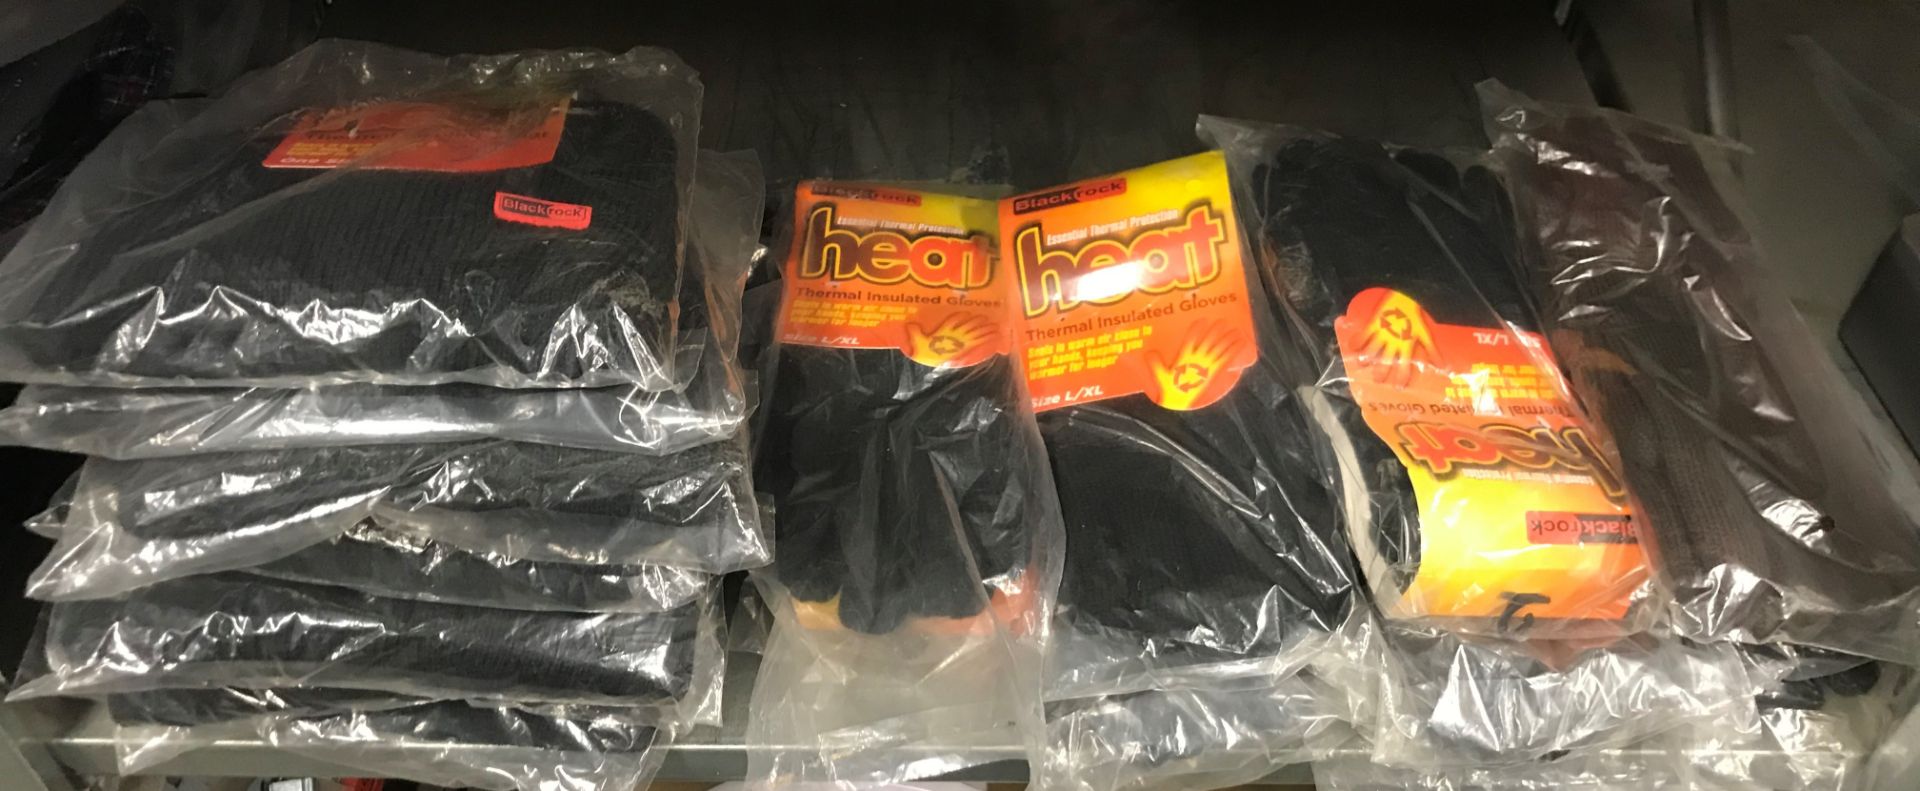 20 x Blackrock Thermal Insulated Hats & Gloves - Image 2 of 2